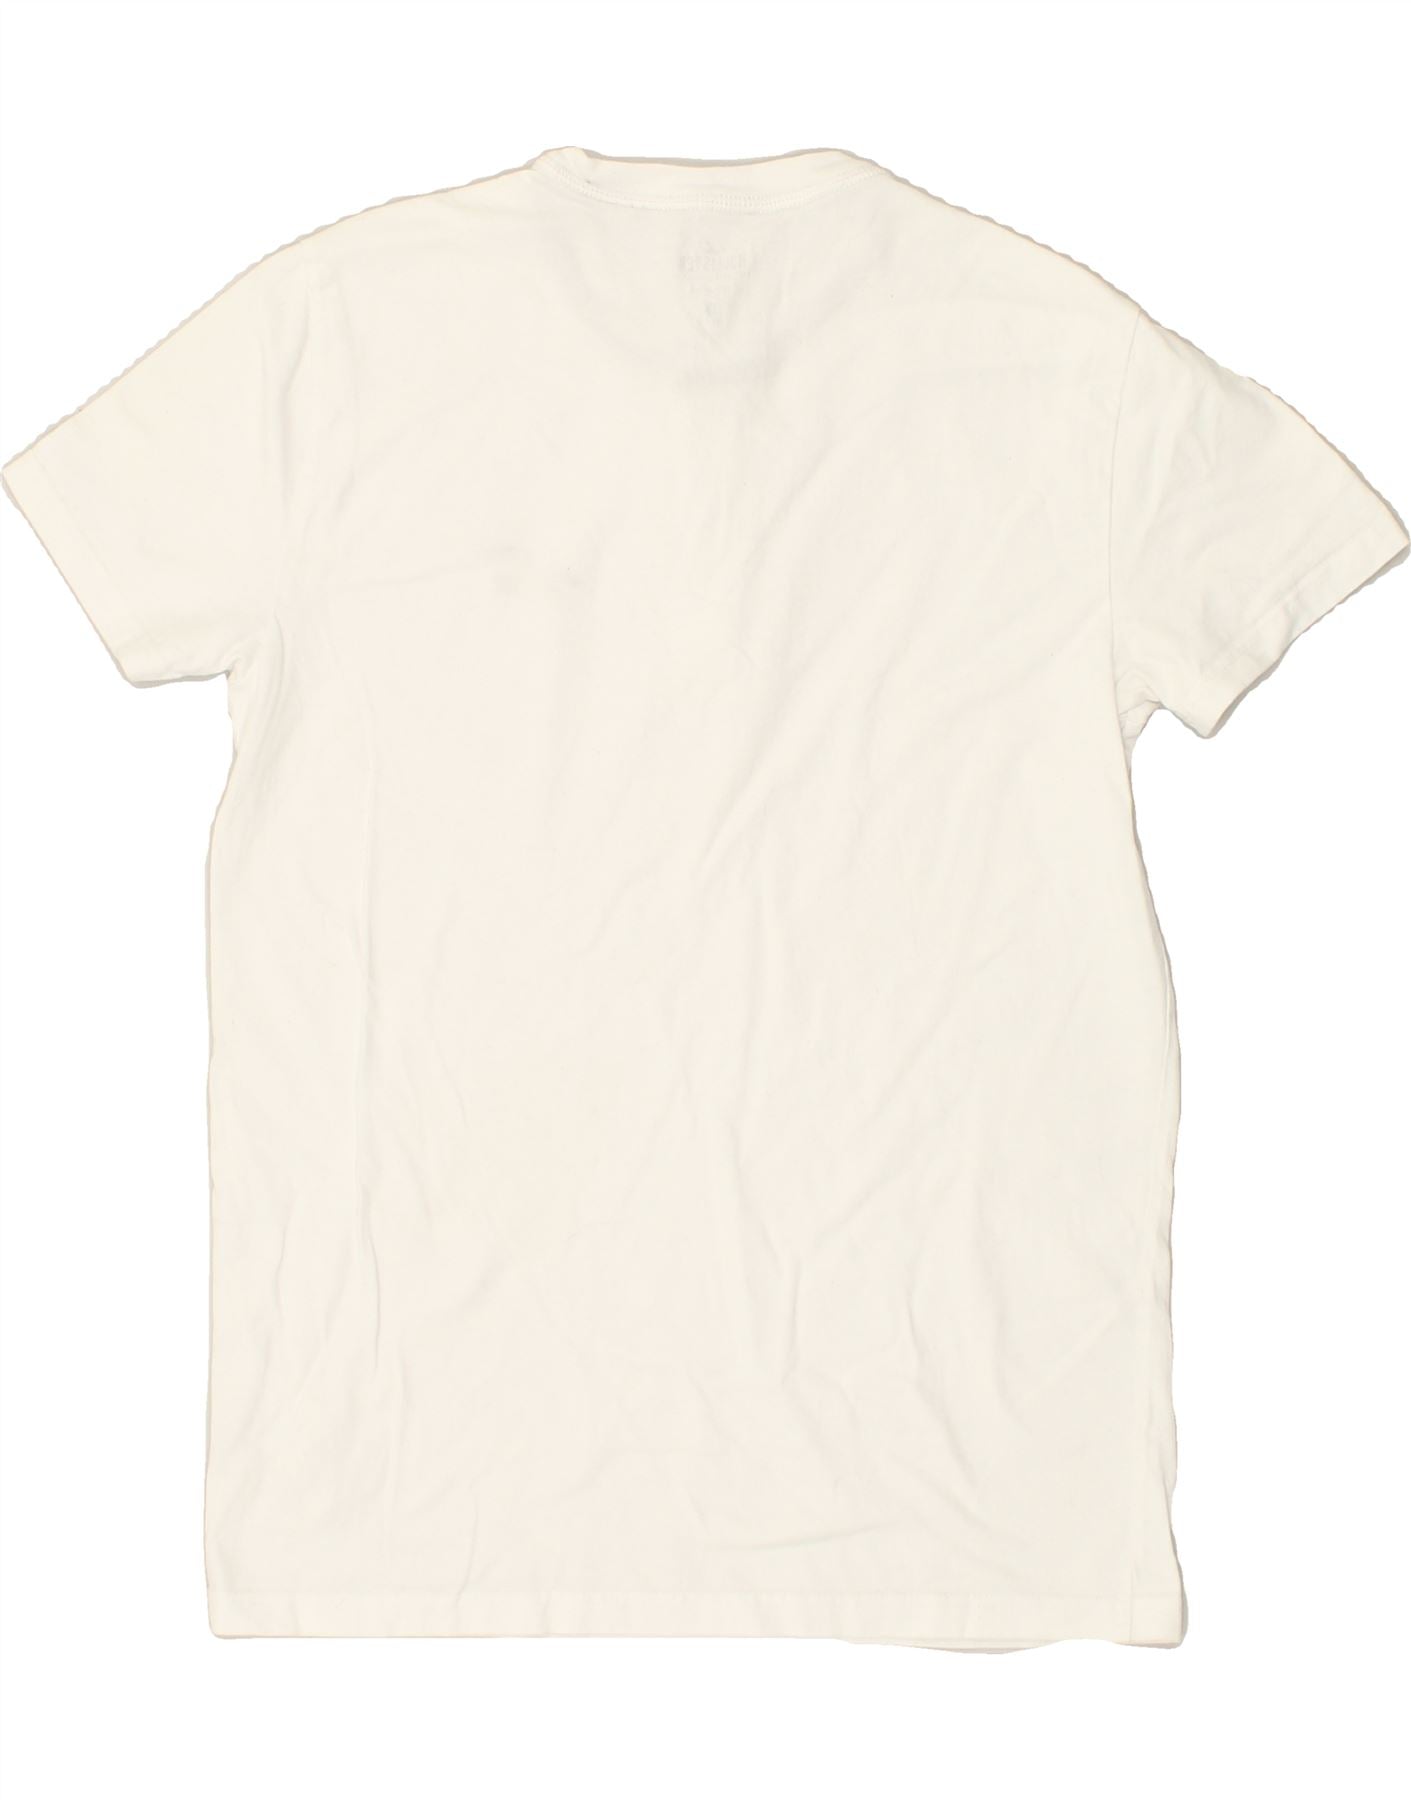 HOLLISTER Mens Henley T-Shirt Top Small White Cotton, Vintage &  Second-Hand Clothing Online